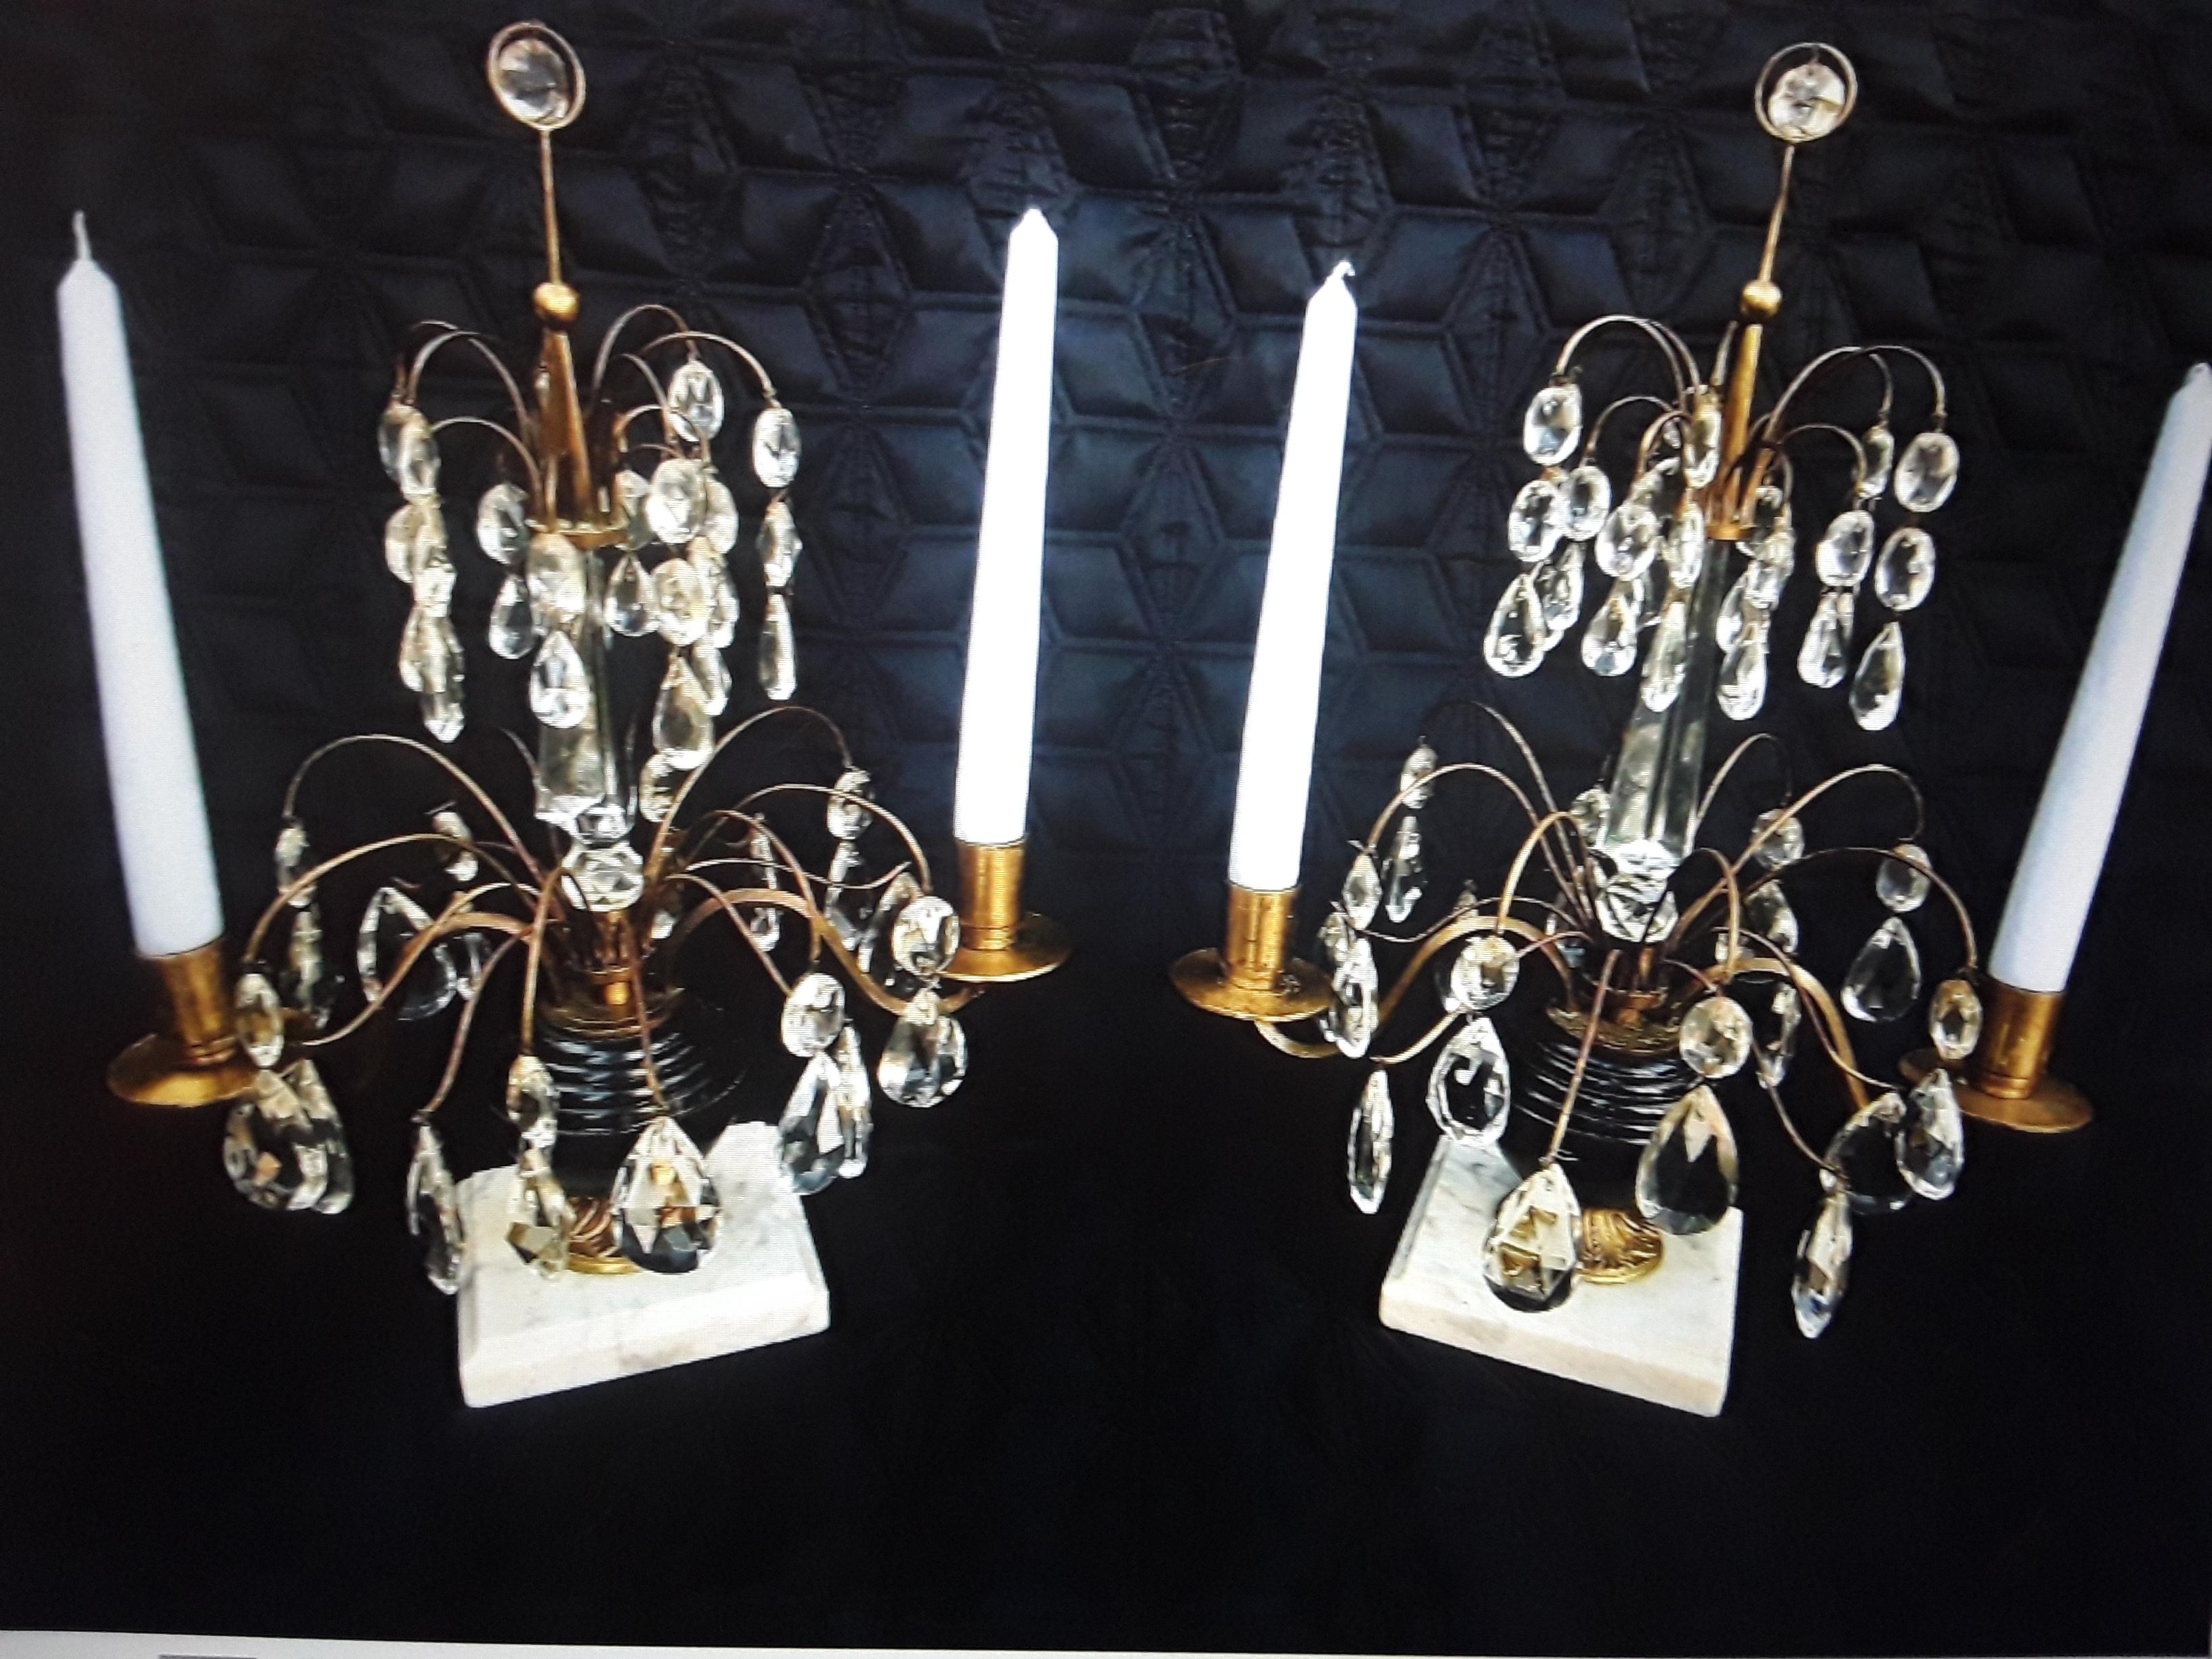 Art Glass Pair Early 19thc Baltic Neoclassical style Ormolu w/ Cobalt Glass Candelabra For Sale